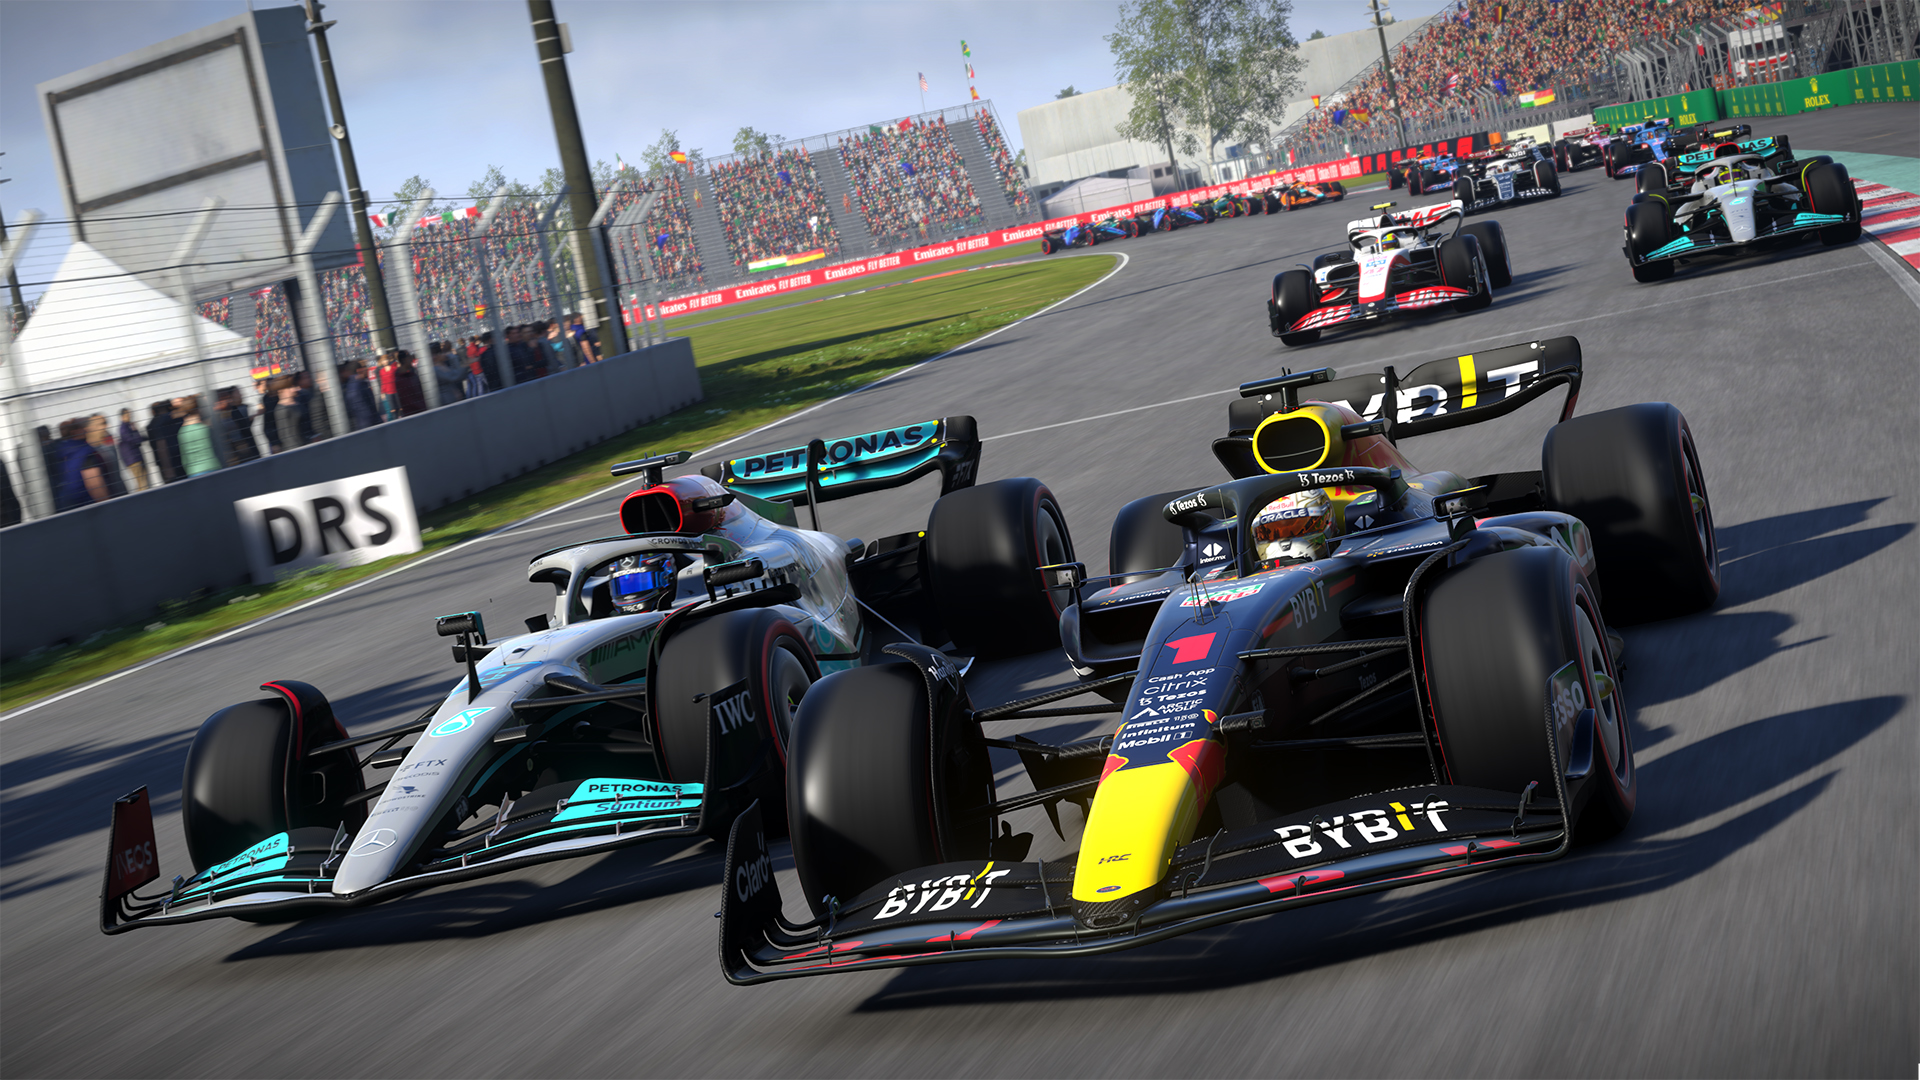 All of the starting liveries in F1 22. Scroll ➡️ : r/F1Game